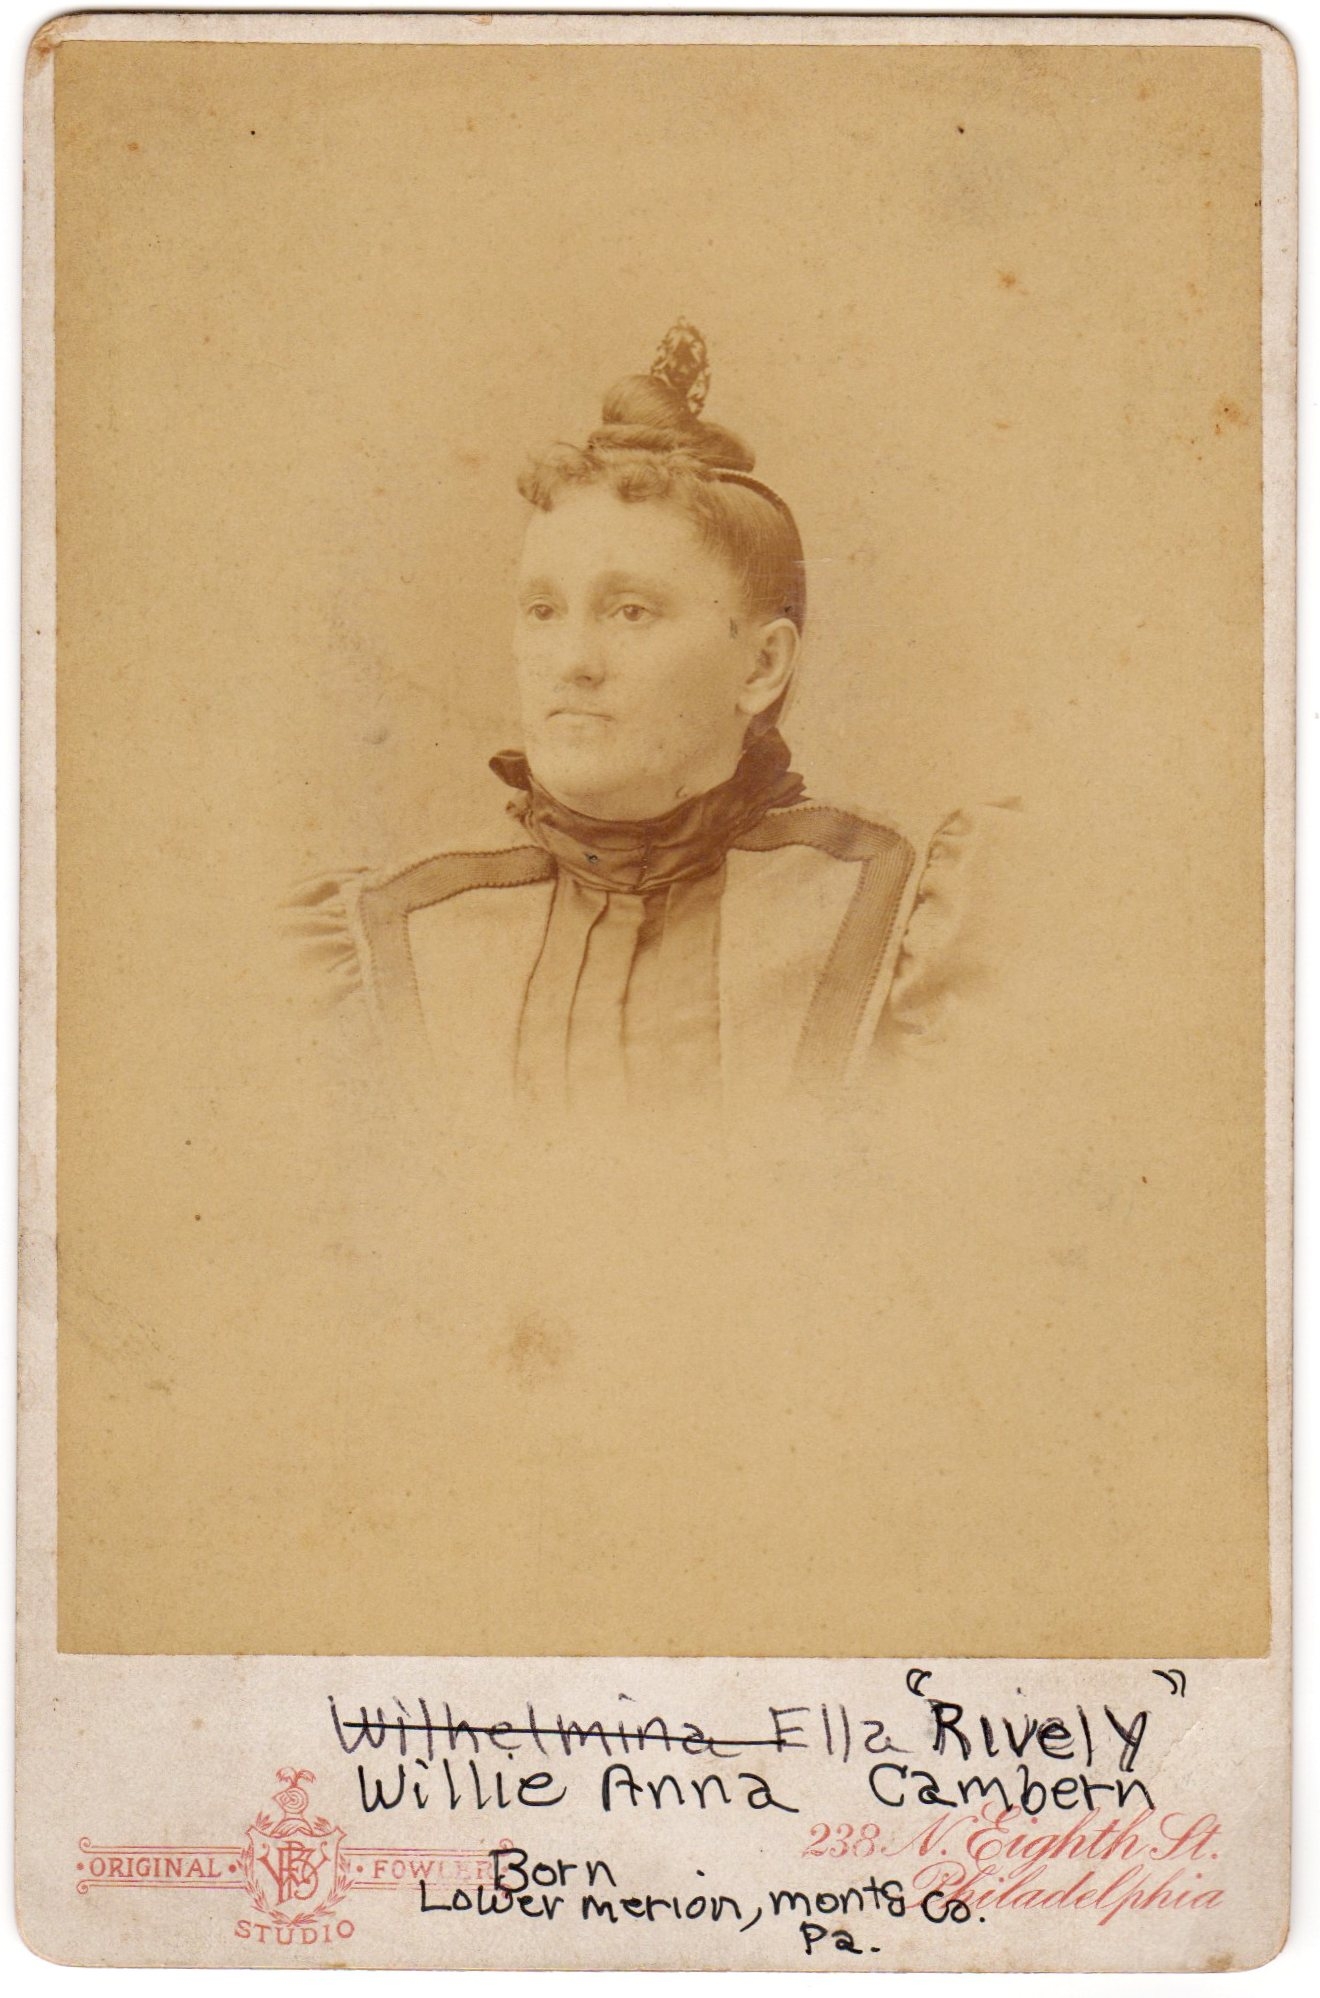 Mrs Willie Anna (Cambern) Rively